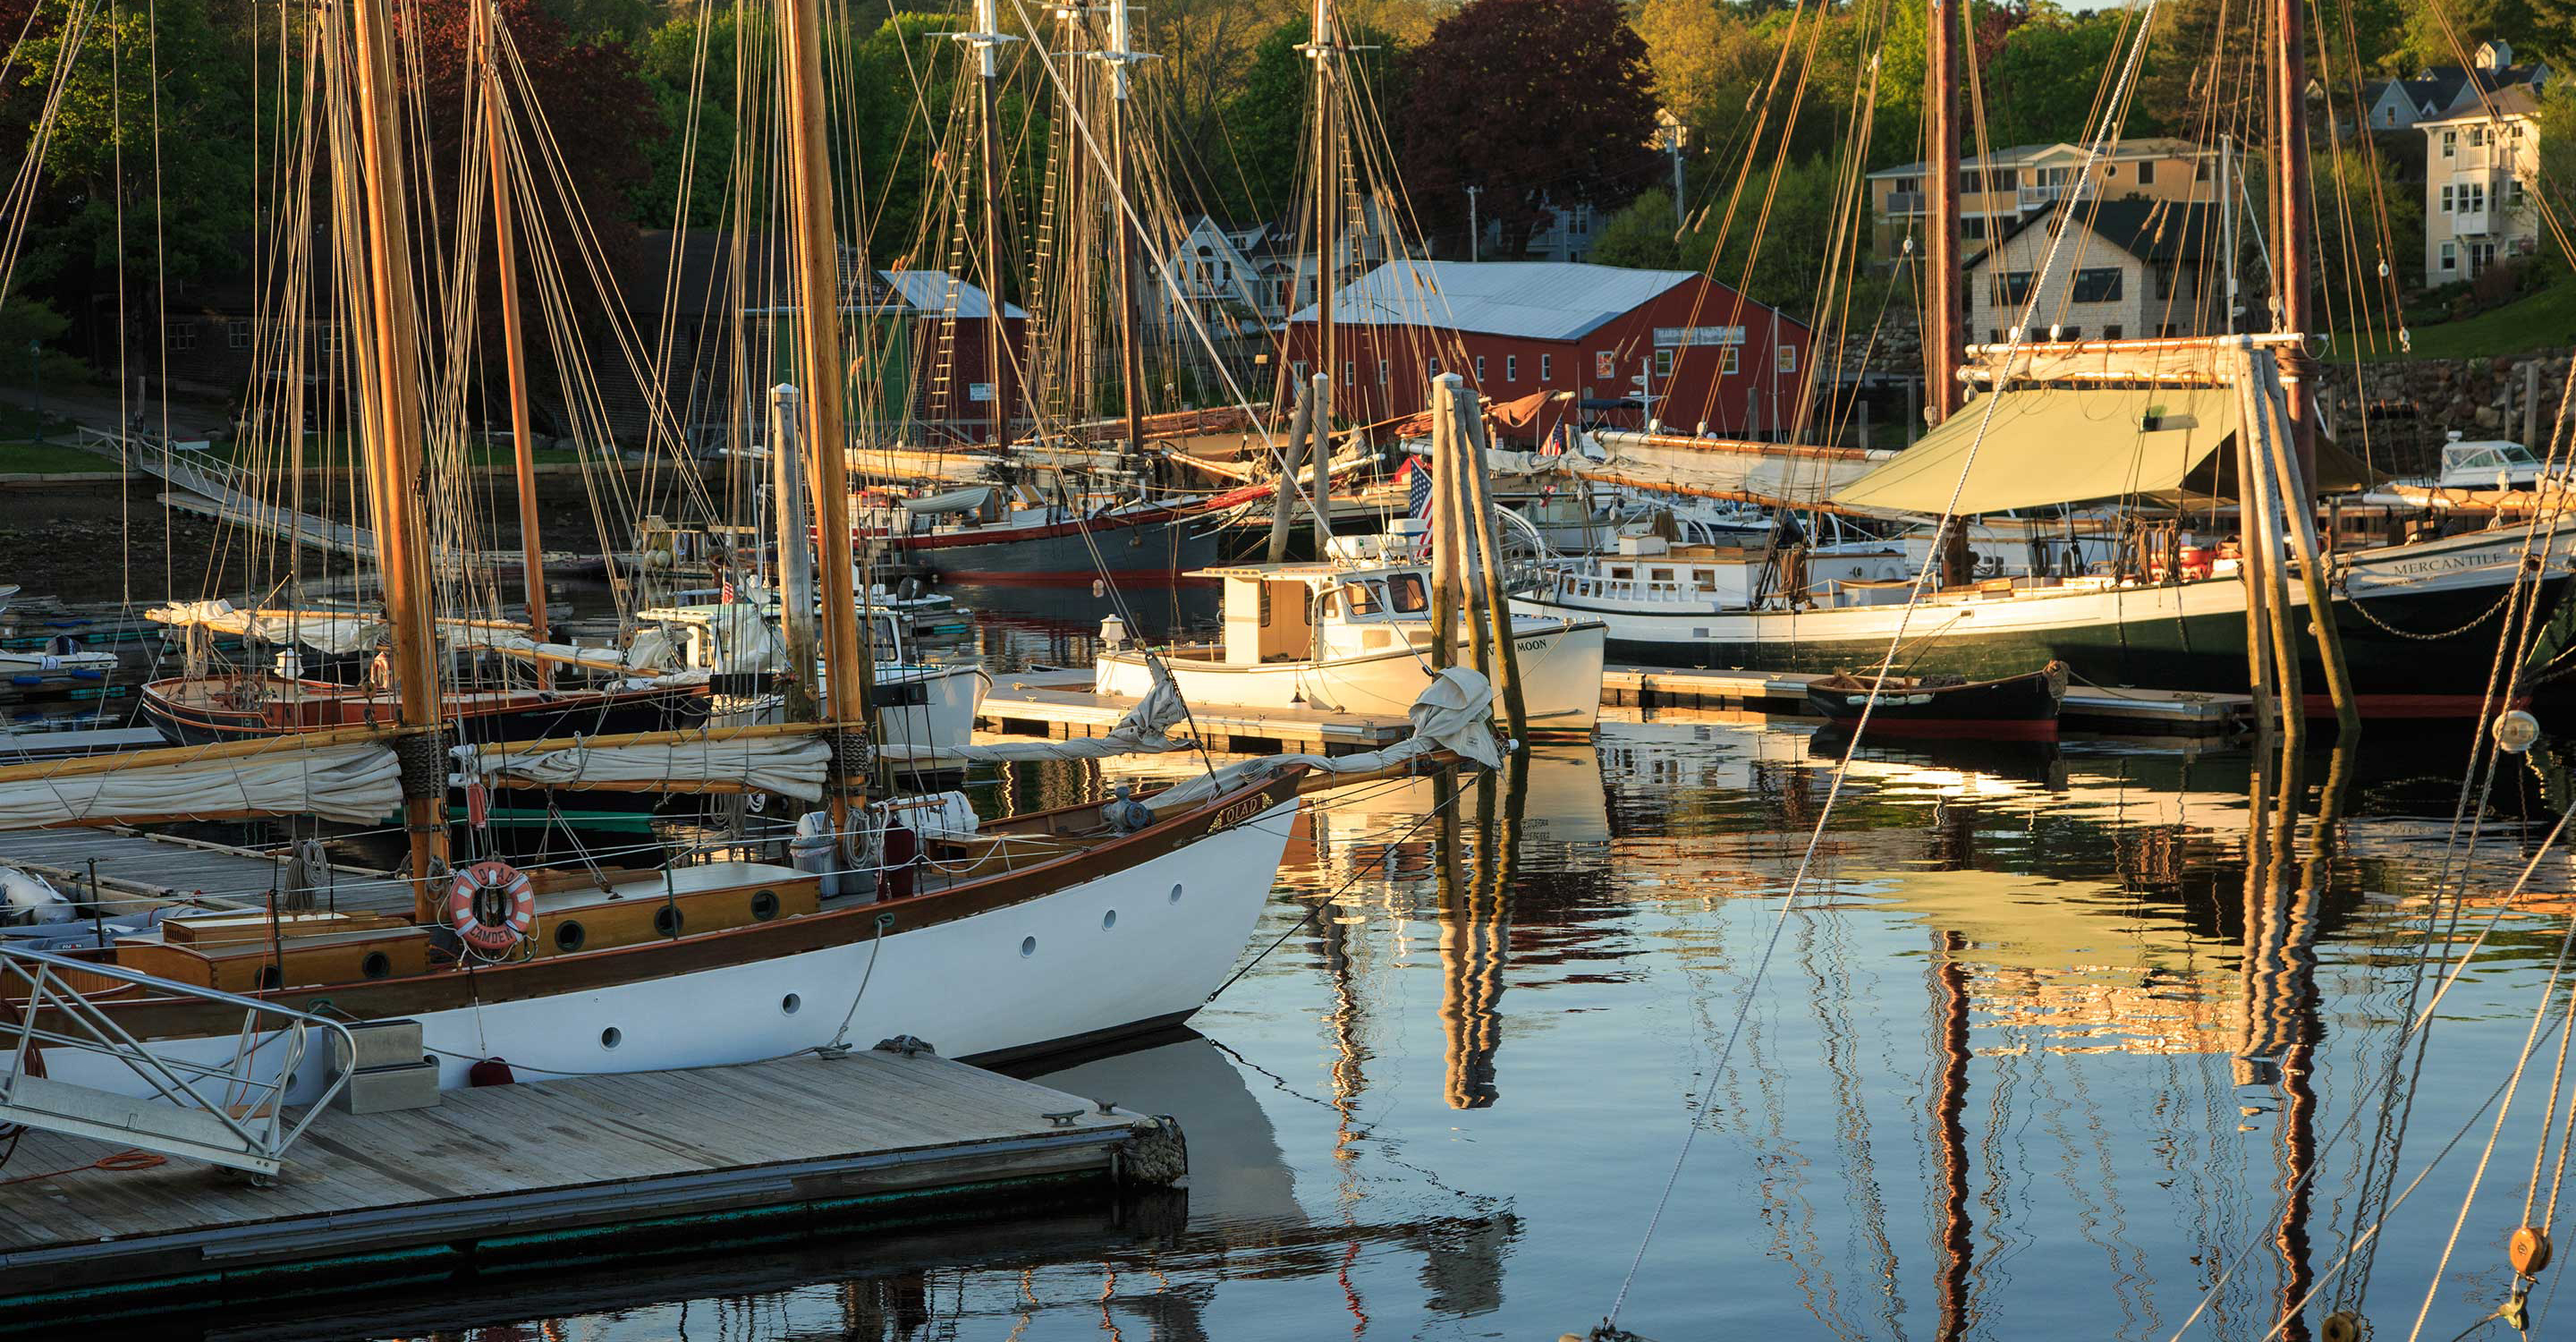 Boats sit in Camden, Maine harbor with bright fall foliage in Autumn